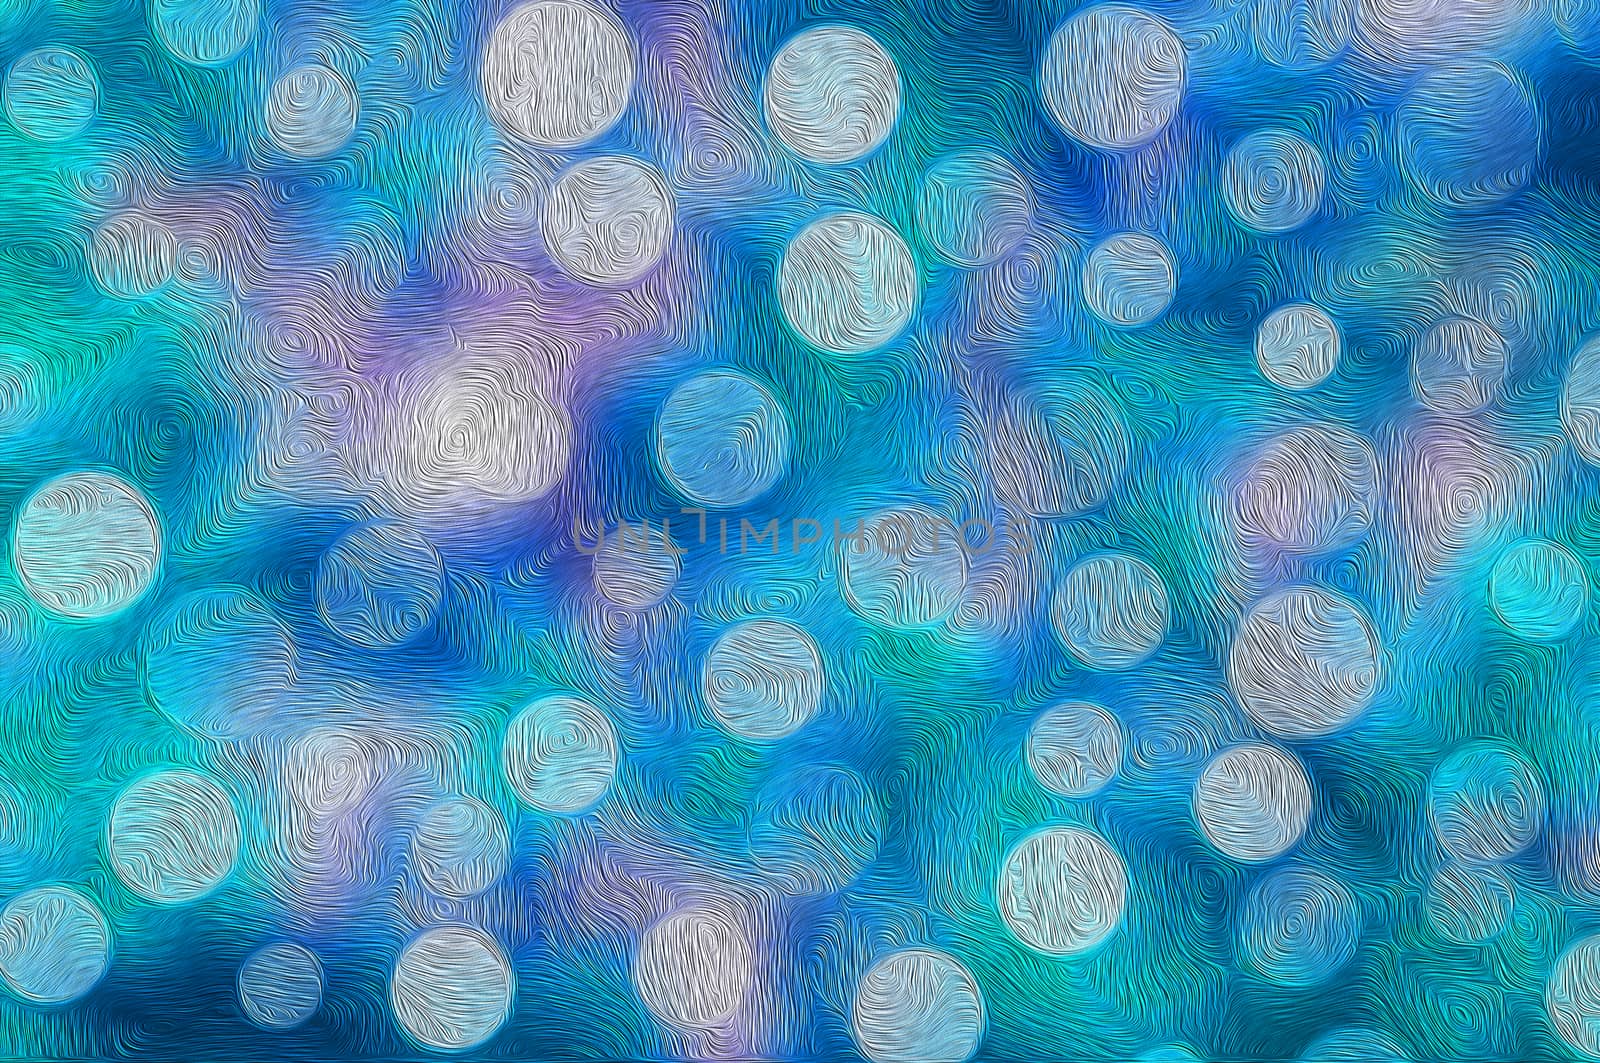 Shining Abstract Bokeh Background by siiixth